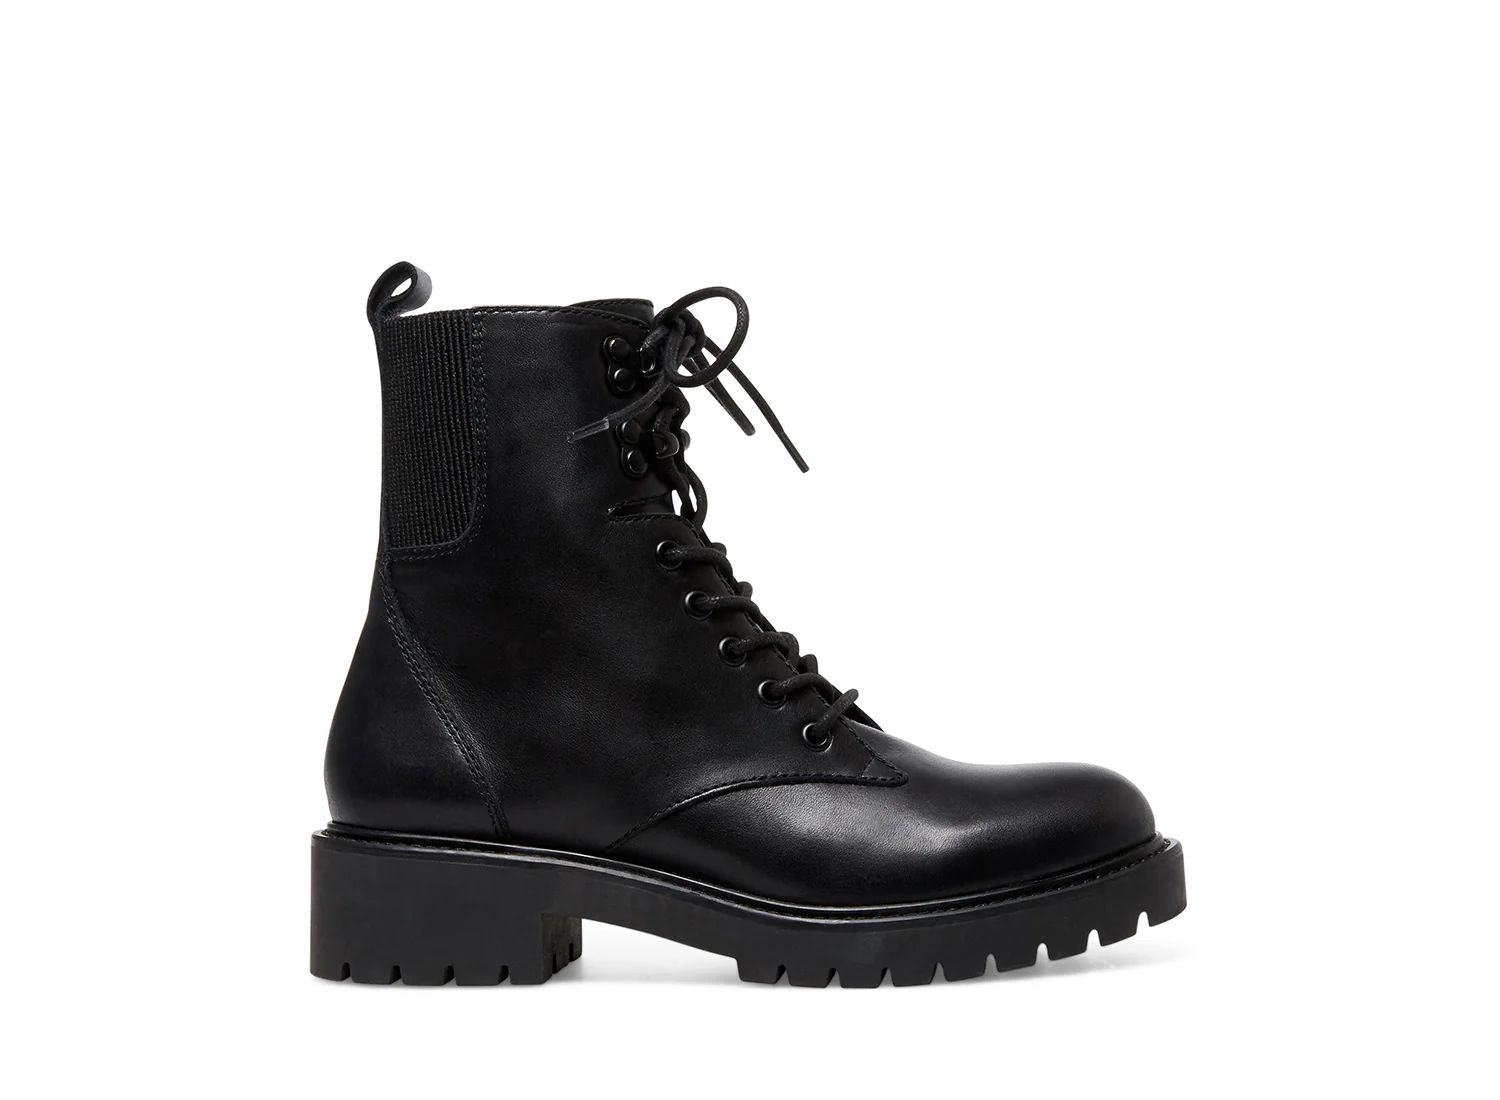 GRIZZLY BLACK LEATHER | Steve Madden (US)